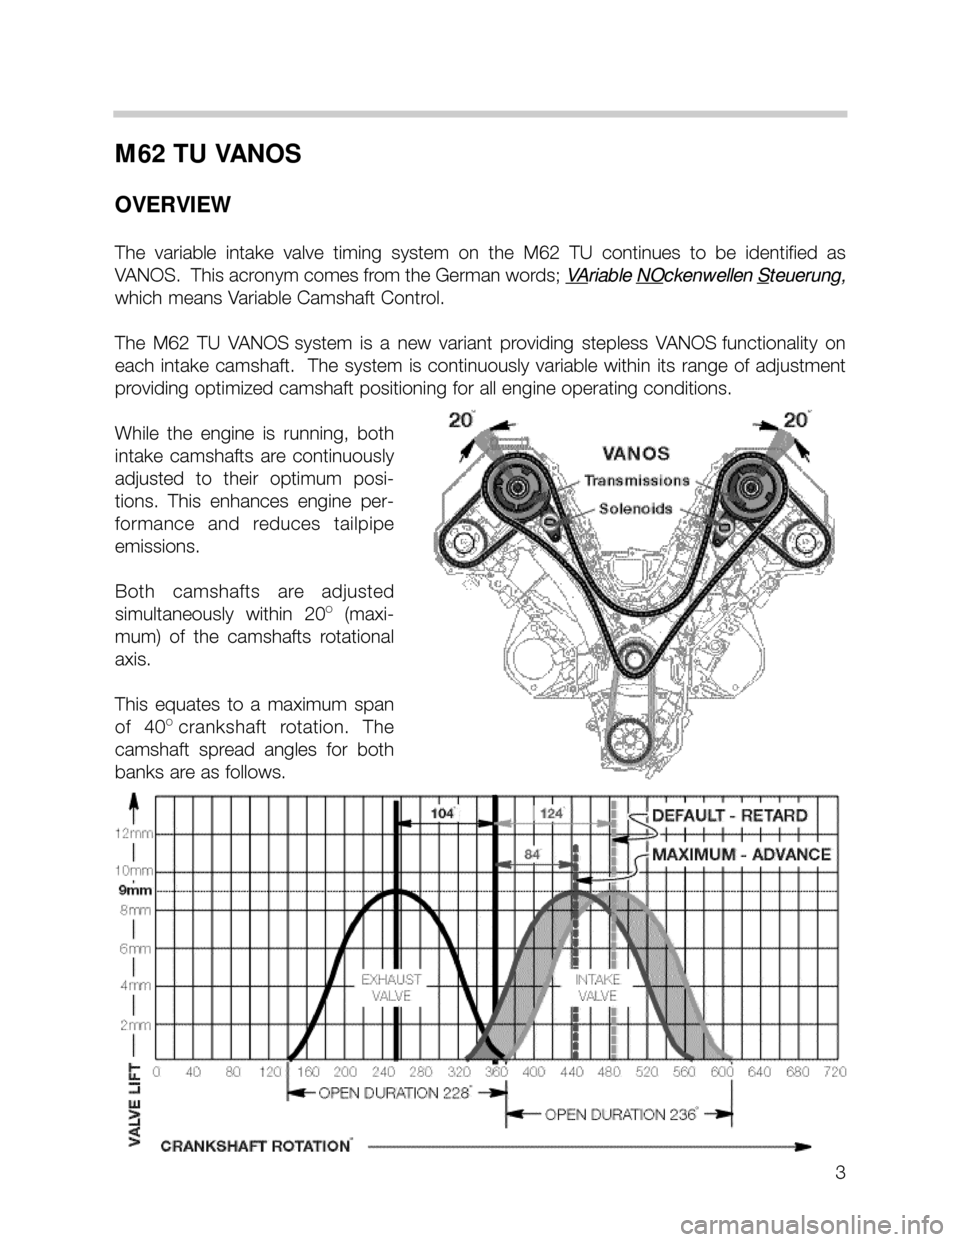 BMW X5 2006 E53 M62TU Engine Workshop Manual 3
M62 TU VANOS
OVERVIEW
The  variable  intake  valve  timing  system  on  the  M62  TU  continues  to  be  identified  as
VANOS.  This acronym comes from the German words; V
Ariable NOckenwellen Steue